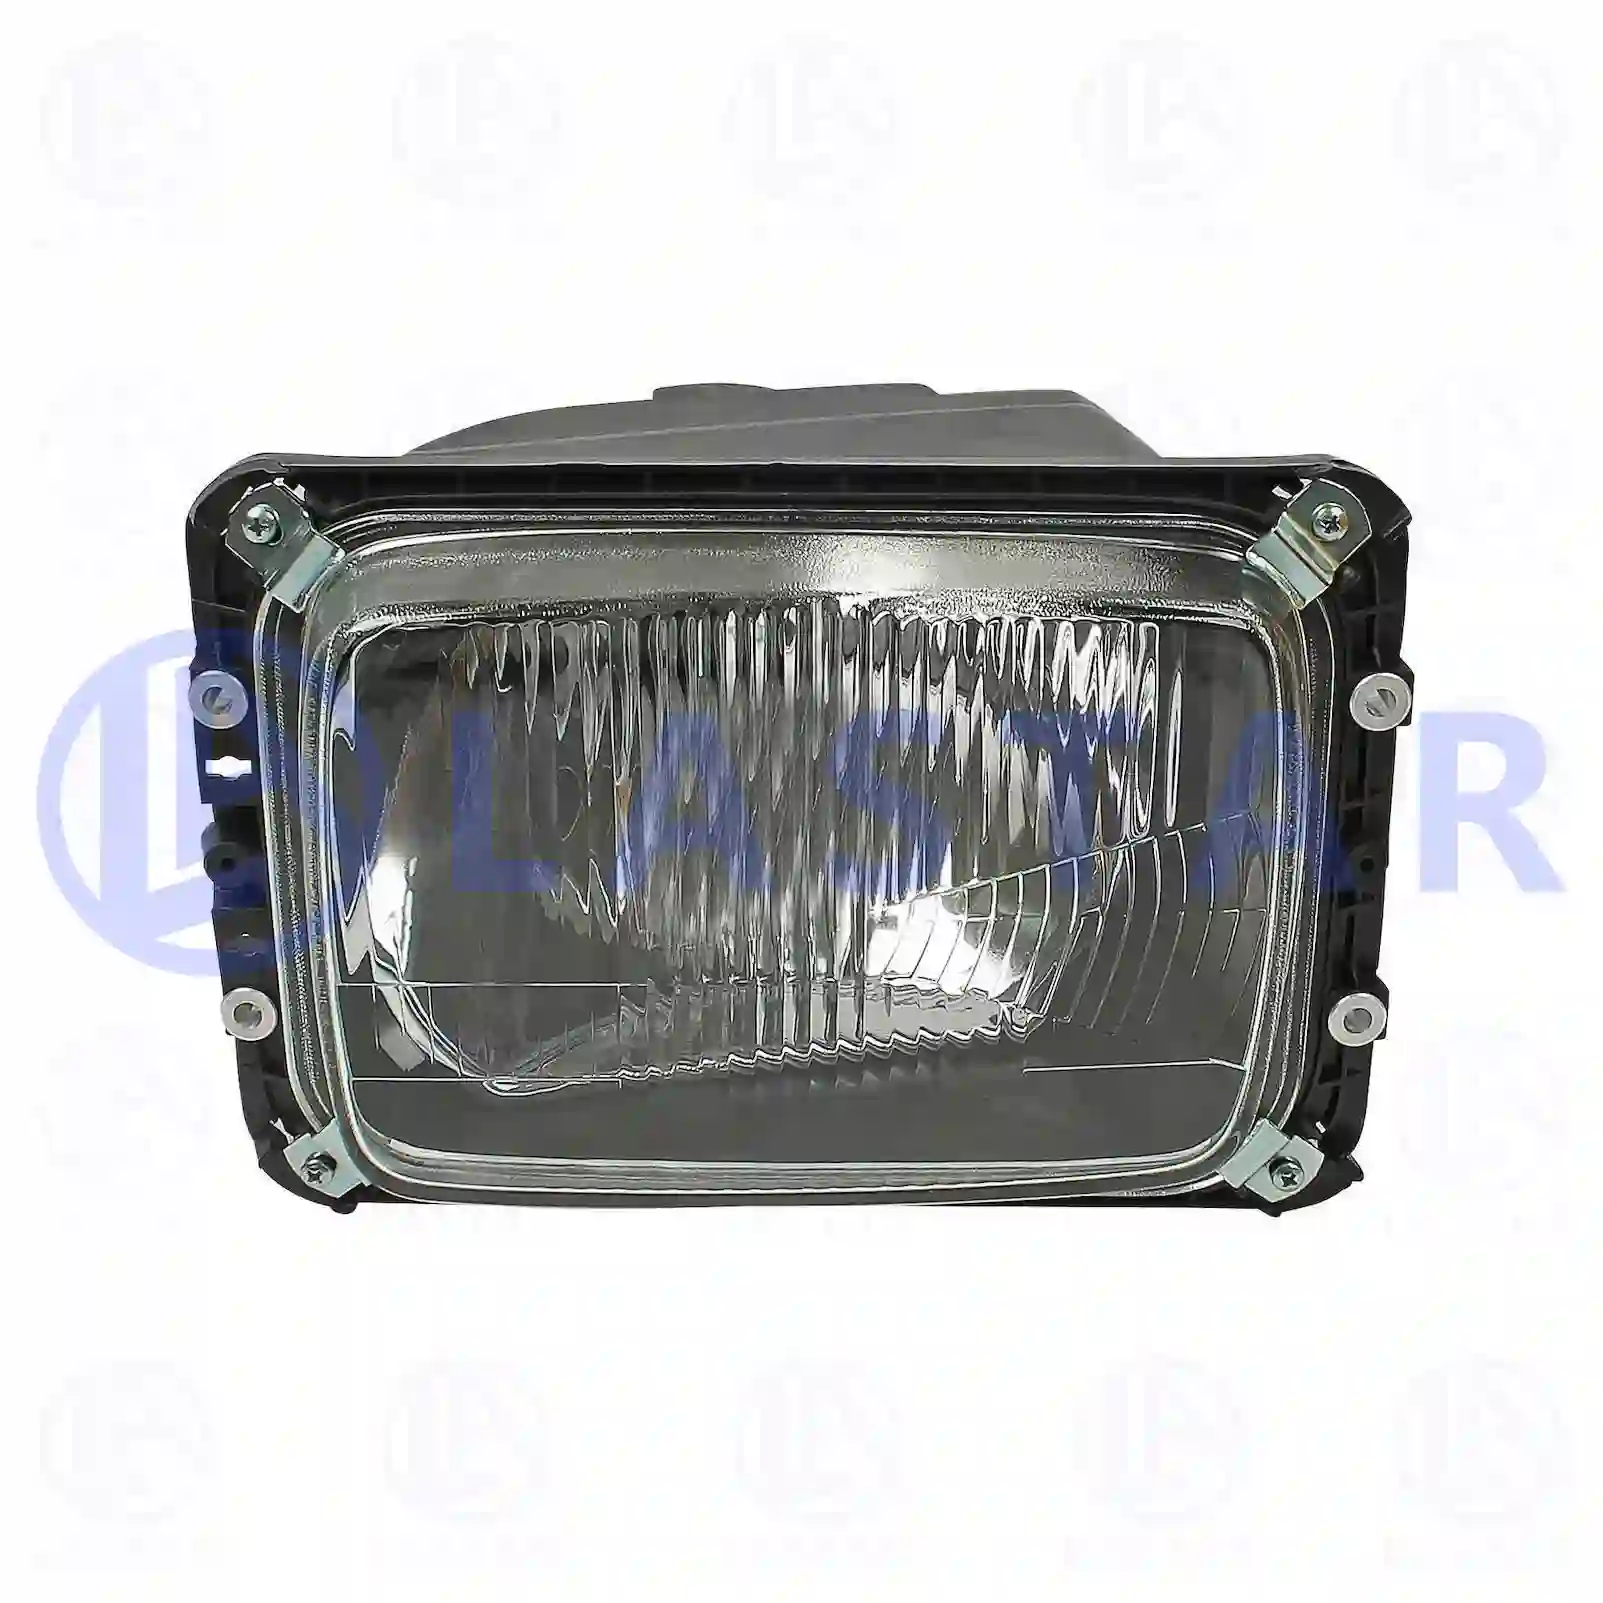 Headlamp, right, without bulbs, 77711738, 18201561, 0018202 ||  77711738 Lastar Spare Part | Truck Spare Parts, Auotomotive Spare Parts Headlamp, right, without bulbs, 77711738, 18201561, 0018202 ||  77711738 Lastar Spare Part | Truck Spare Parts, Auotomotive Spare Parts